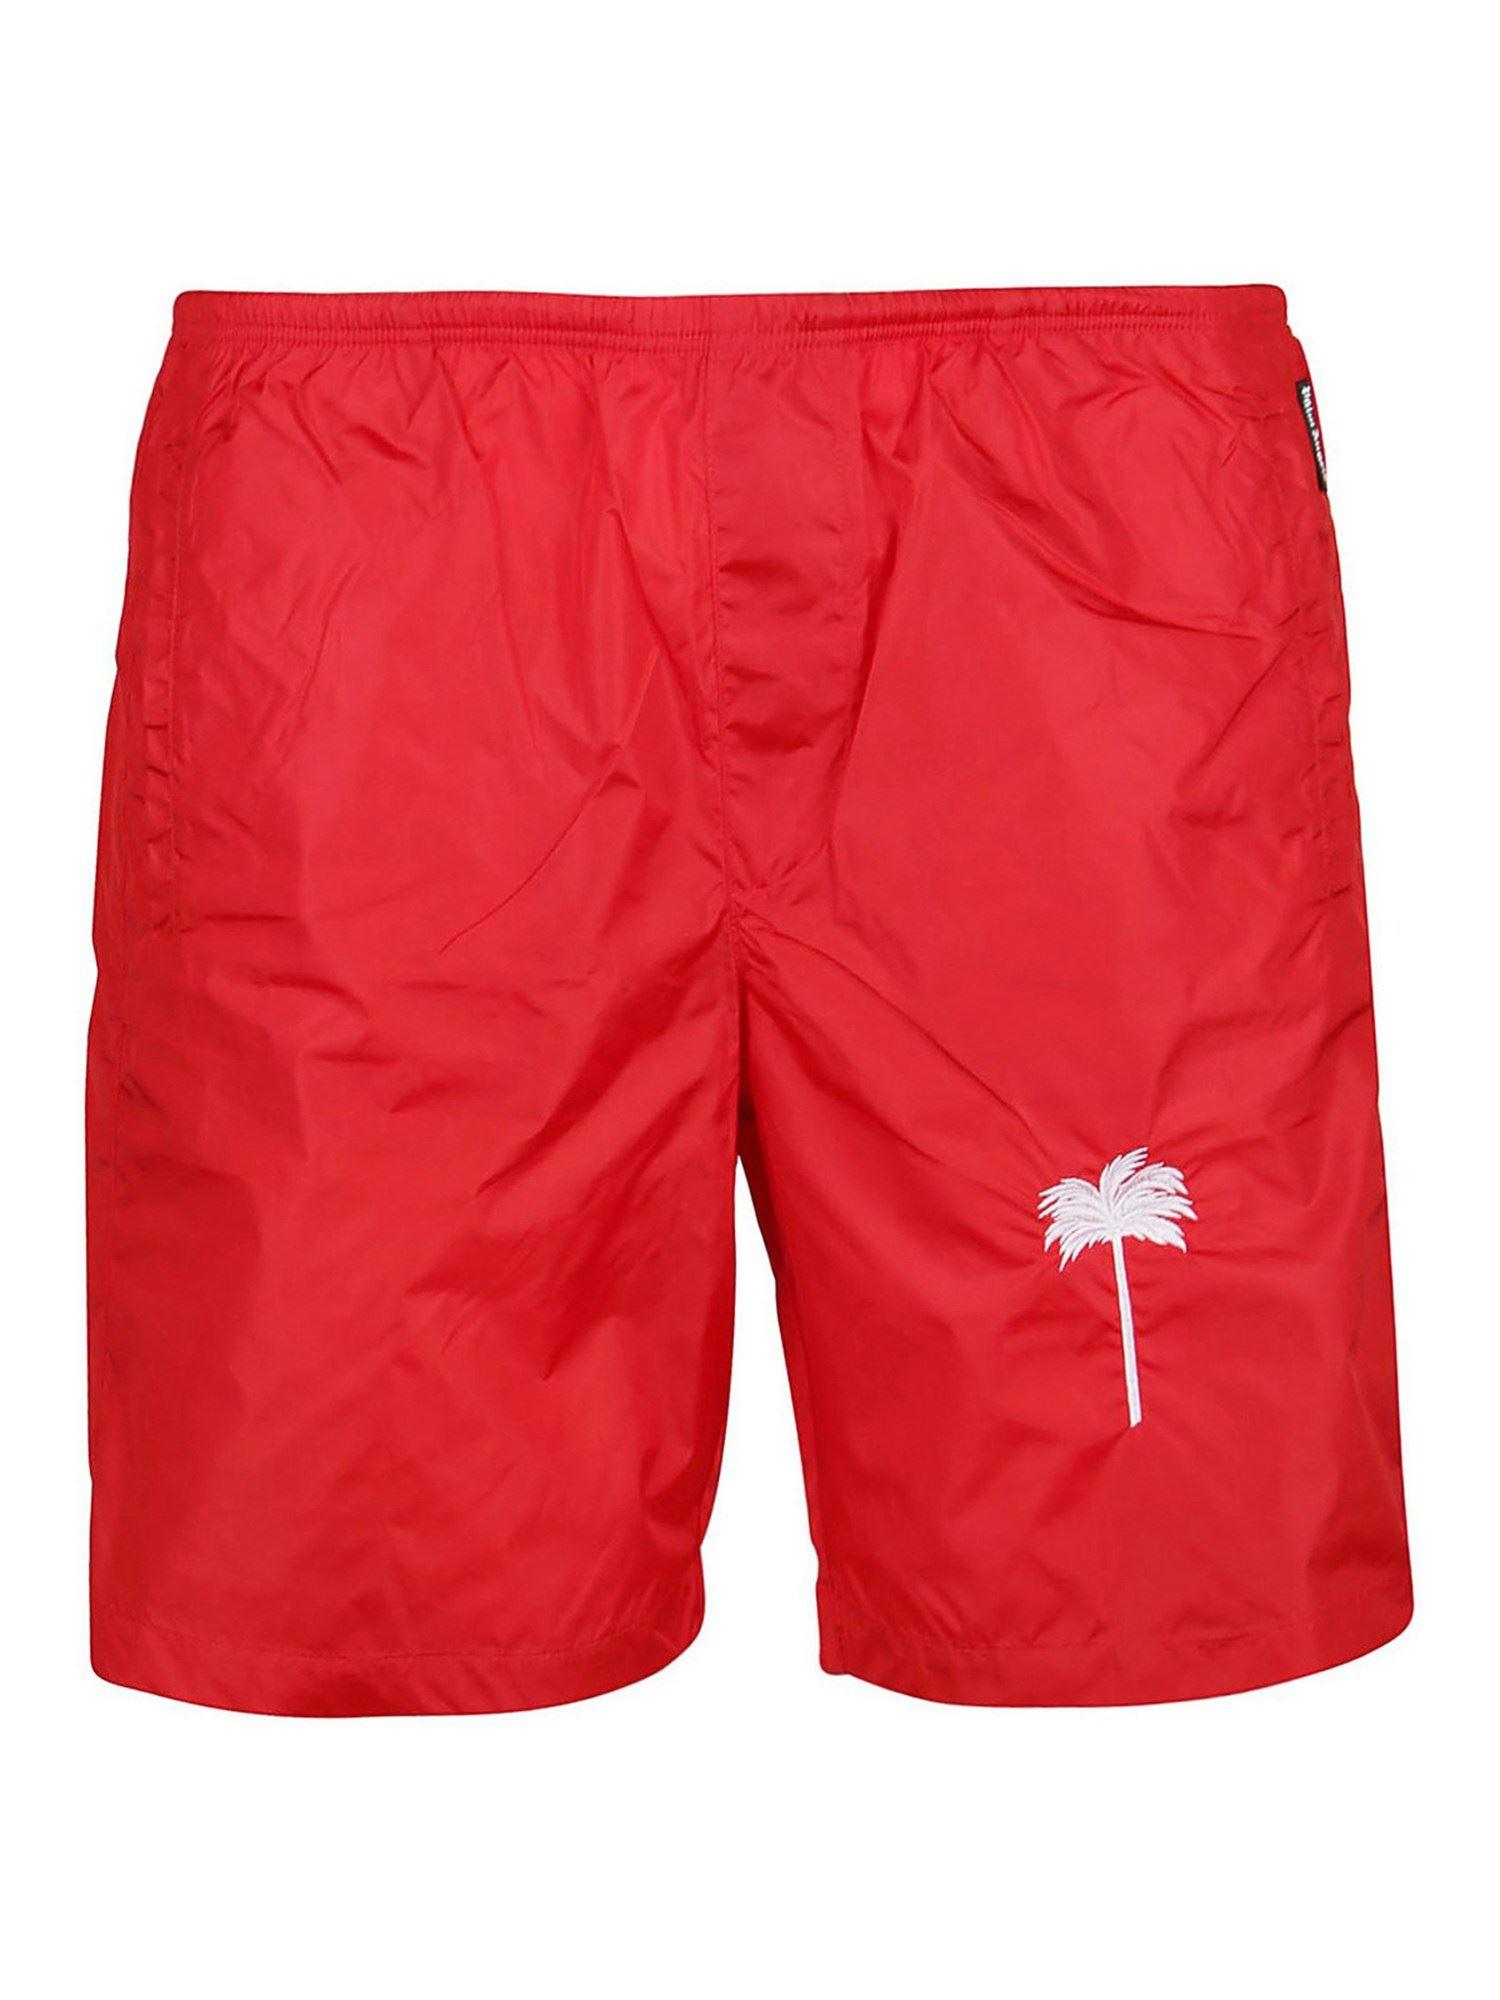 Palm Angels Synthetic Palm Print Nylon Swim Shorts in Red for Men - Lyst